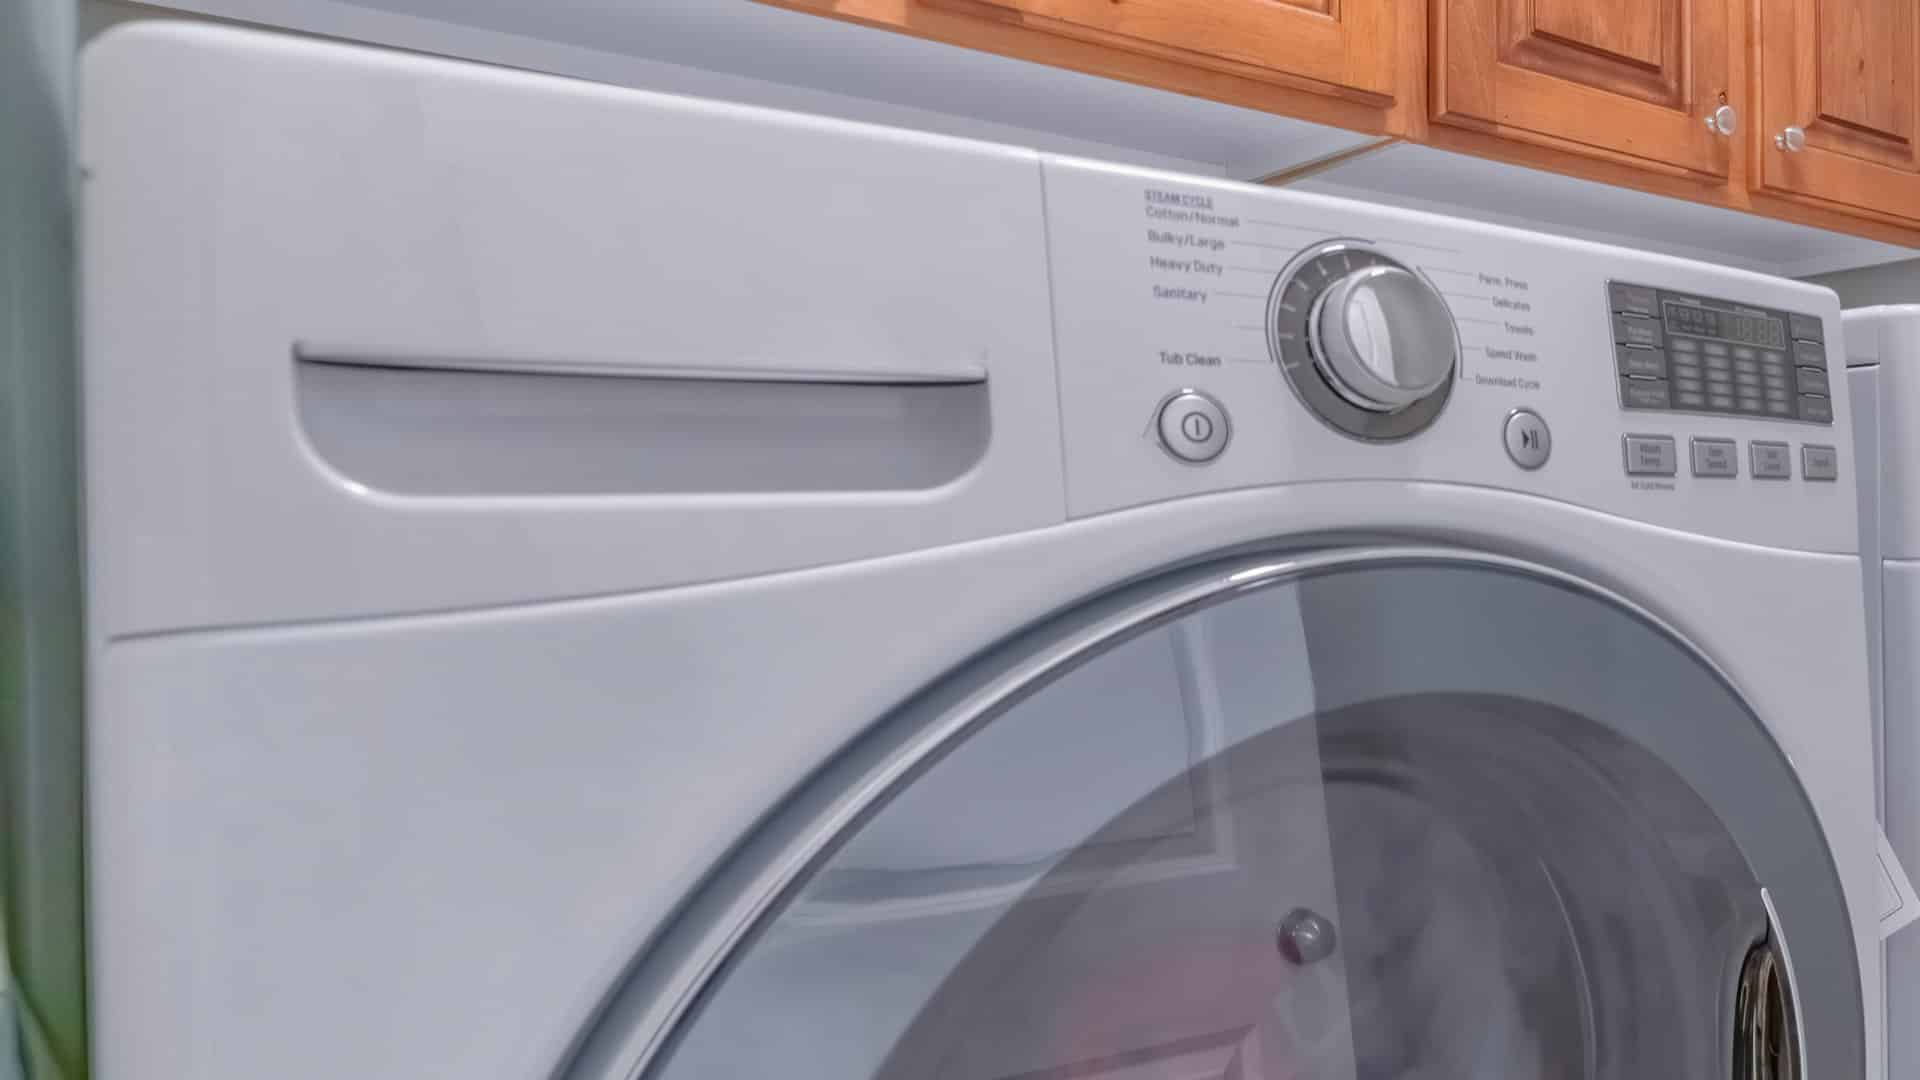 Featured image for “Understanding SC Code on Samsung Washer”